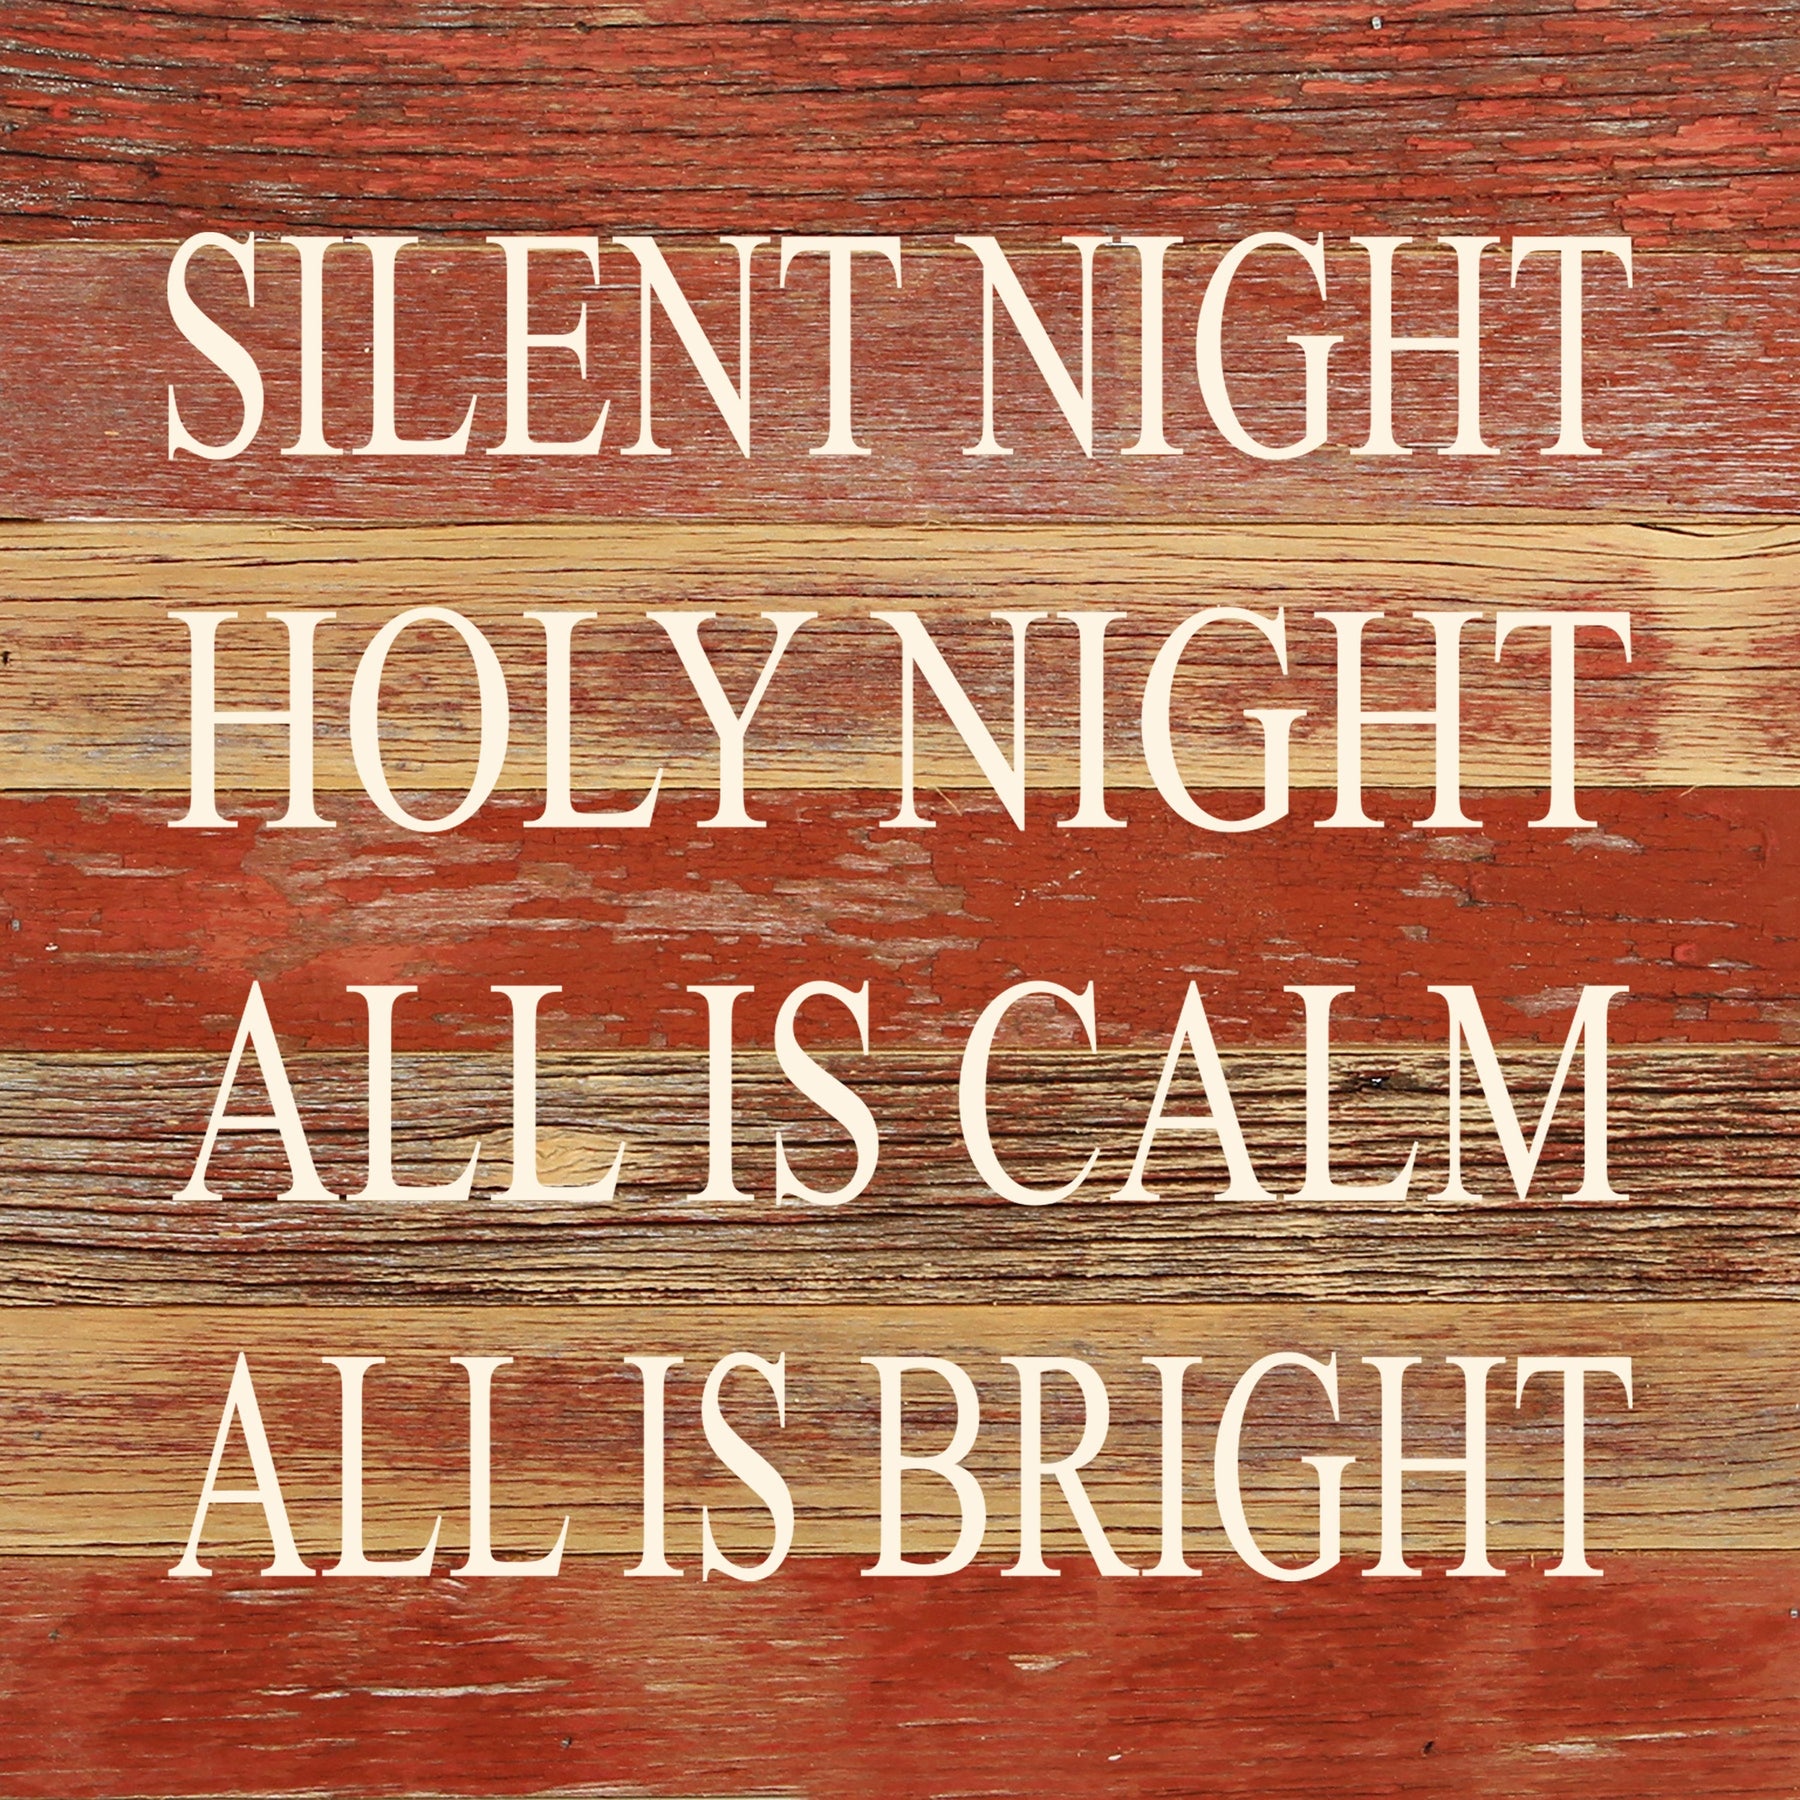 Silent night, holy night, all is calm, all is bright / 10"x10" Reclaimed Wood Sign